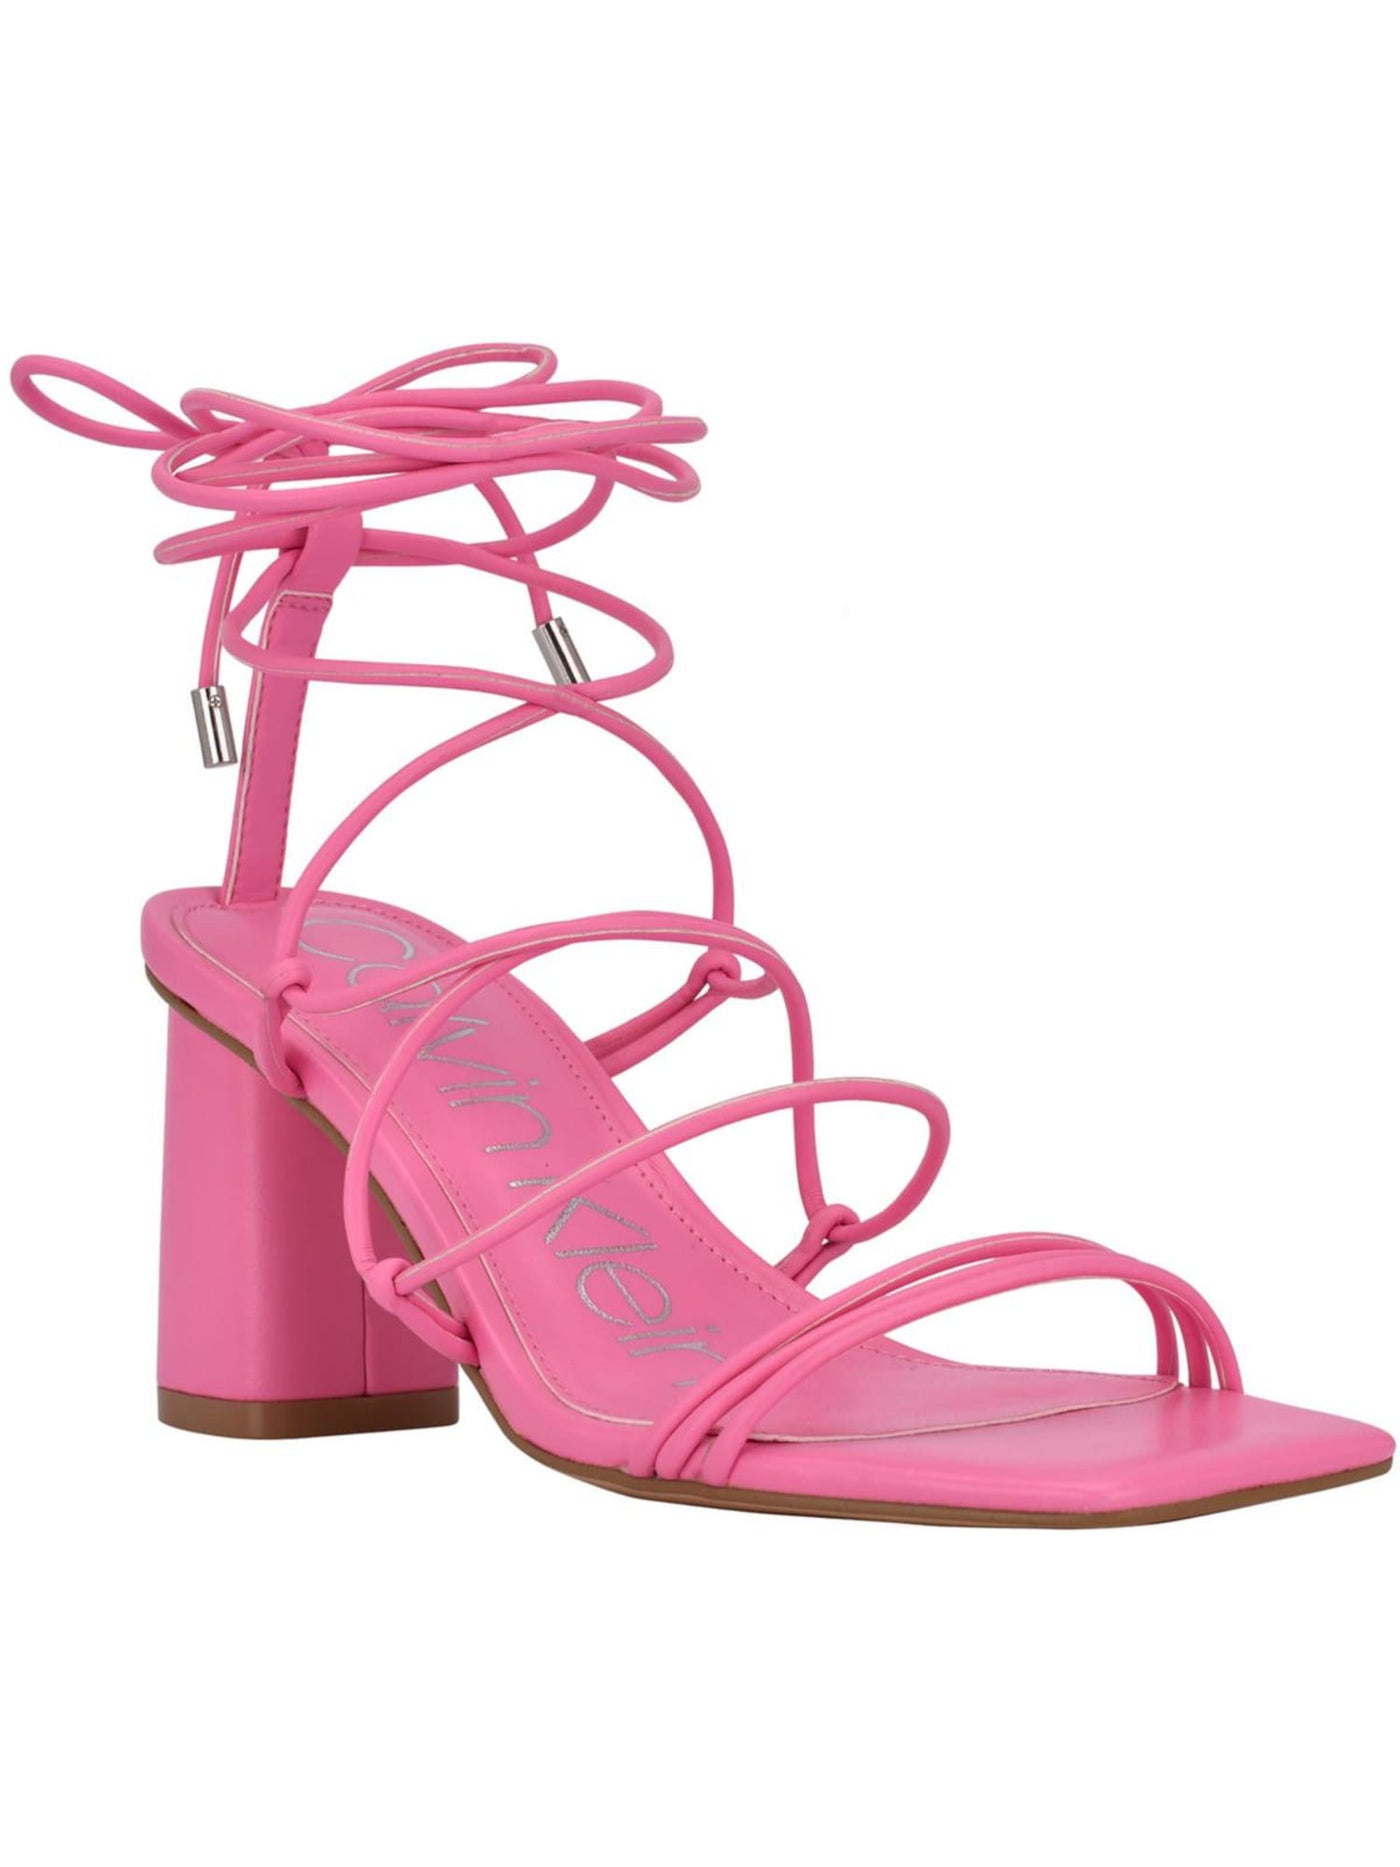 CALVIN KLEIN Womens Pink Padded Strappy Calista Square Toe Block Heel Lace-Up Heeled Sandal 9 M